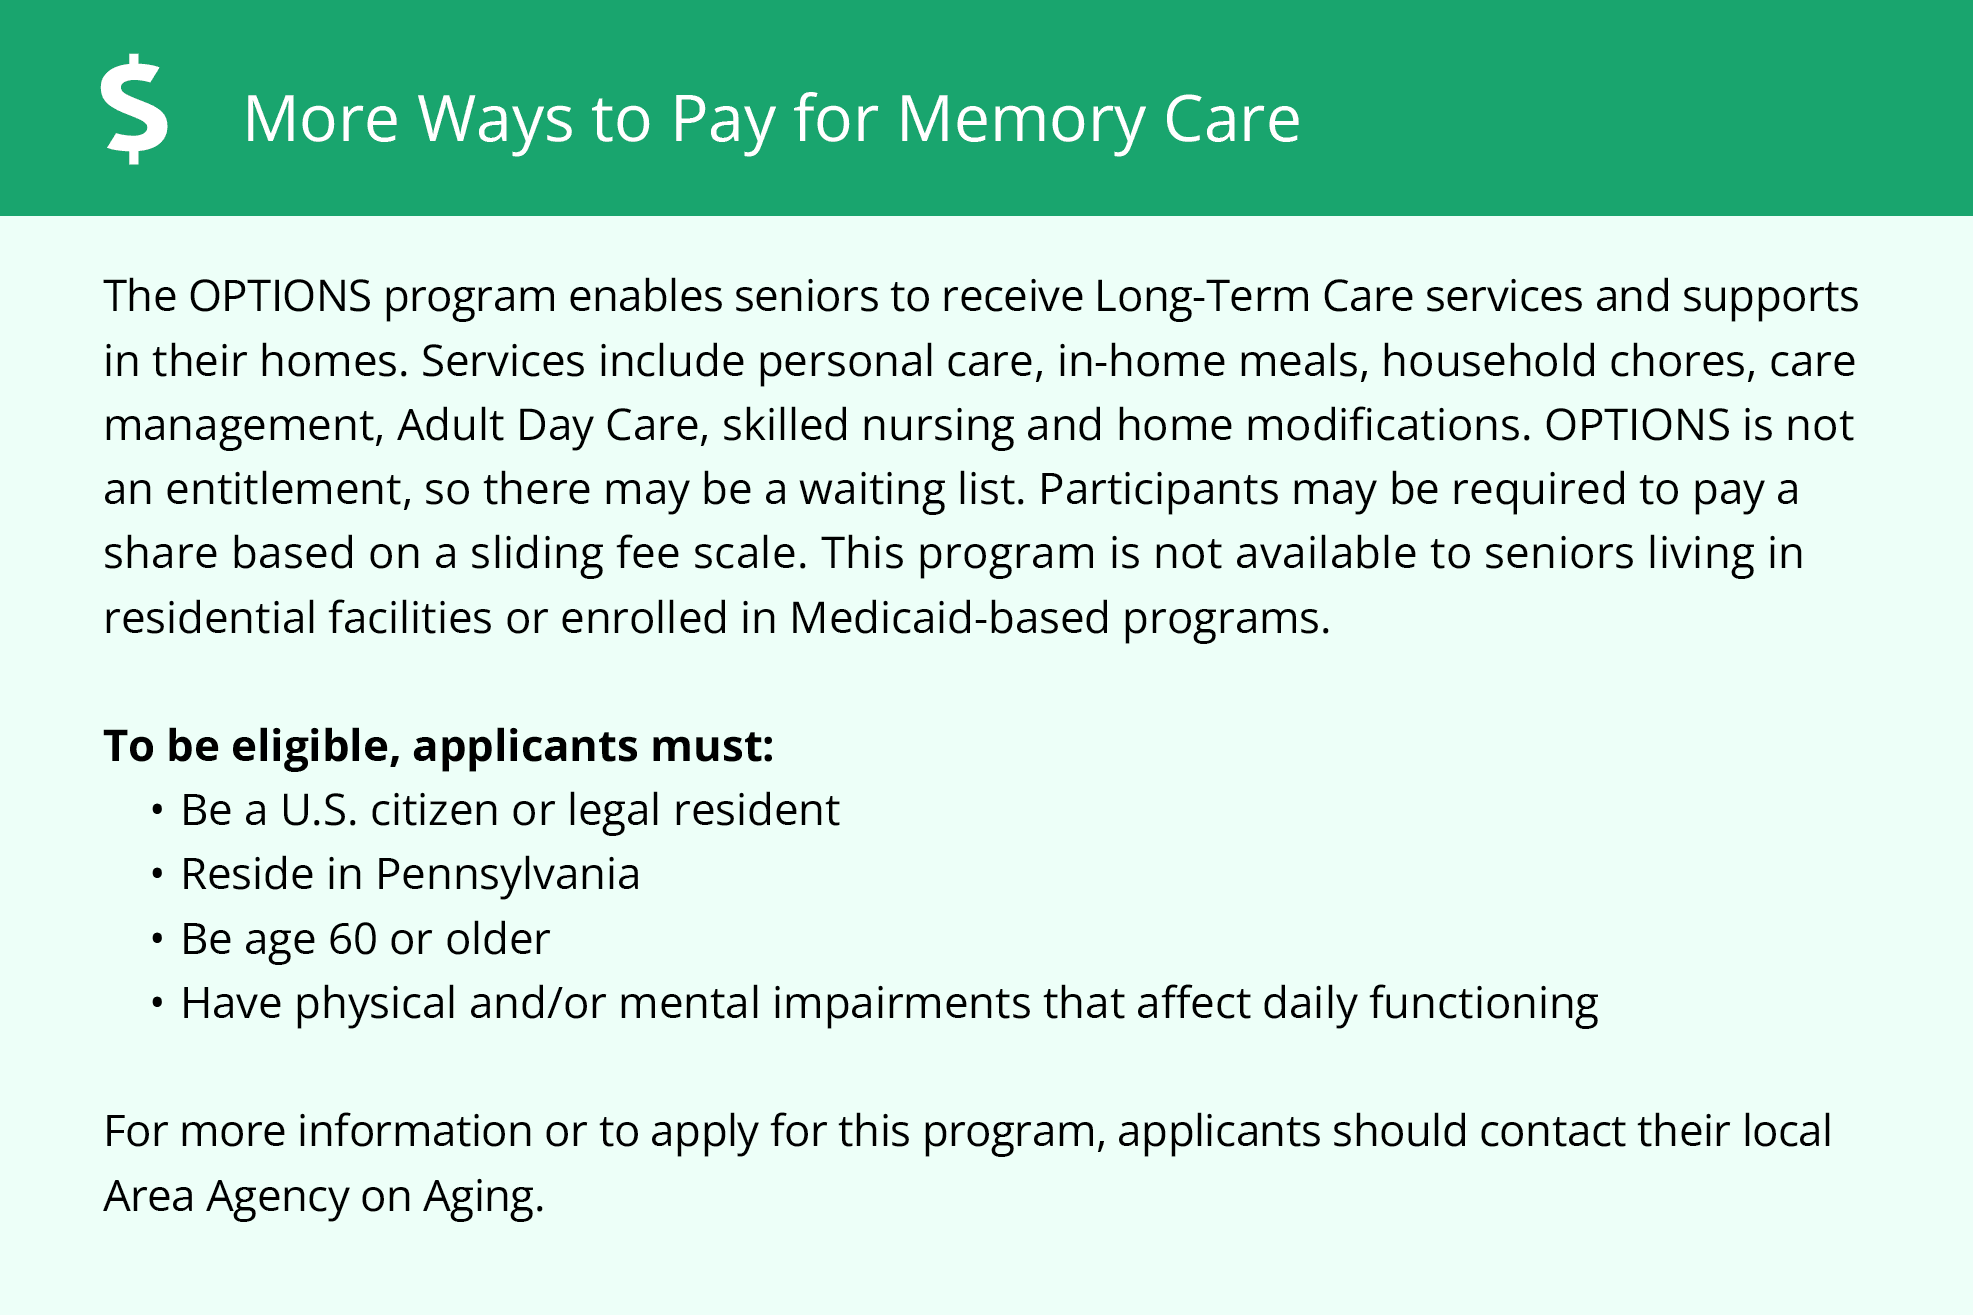 Financial Assistance for Memory Care in Pennsylvania